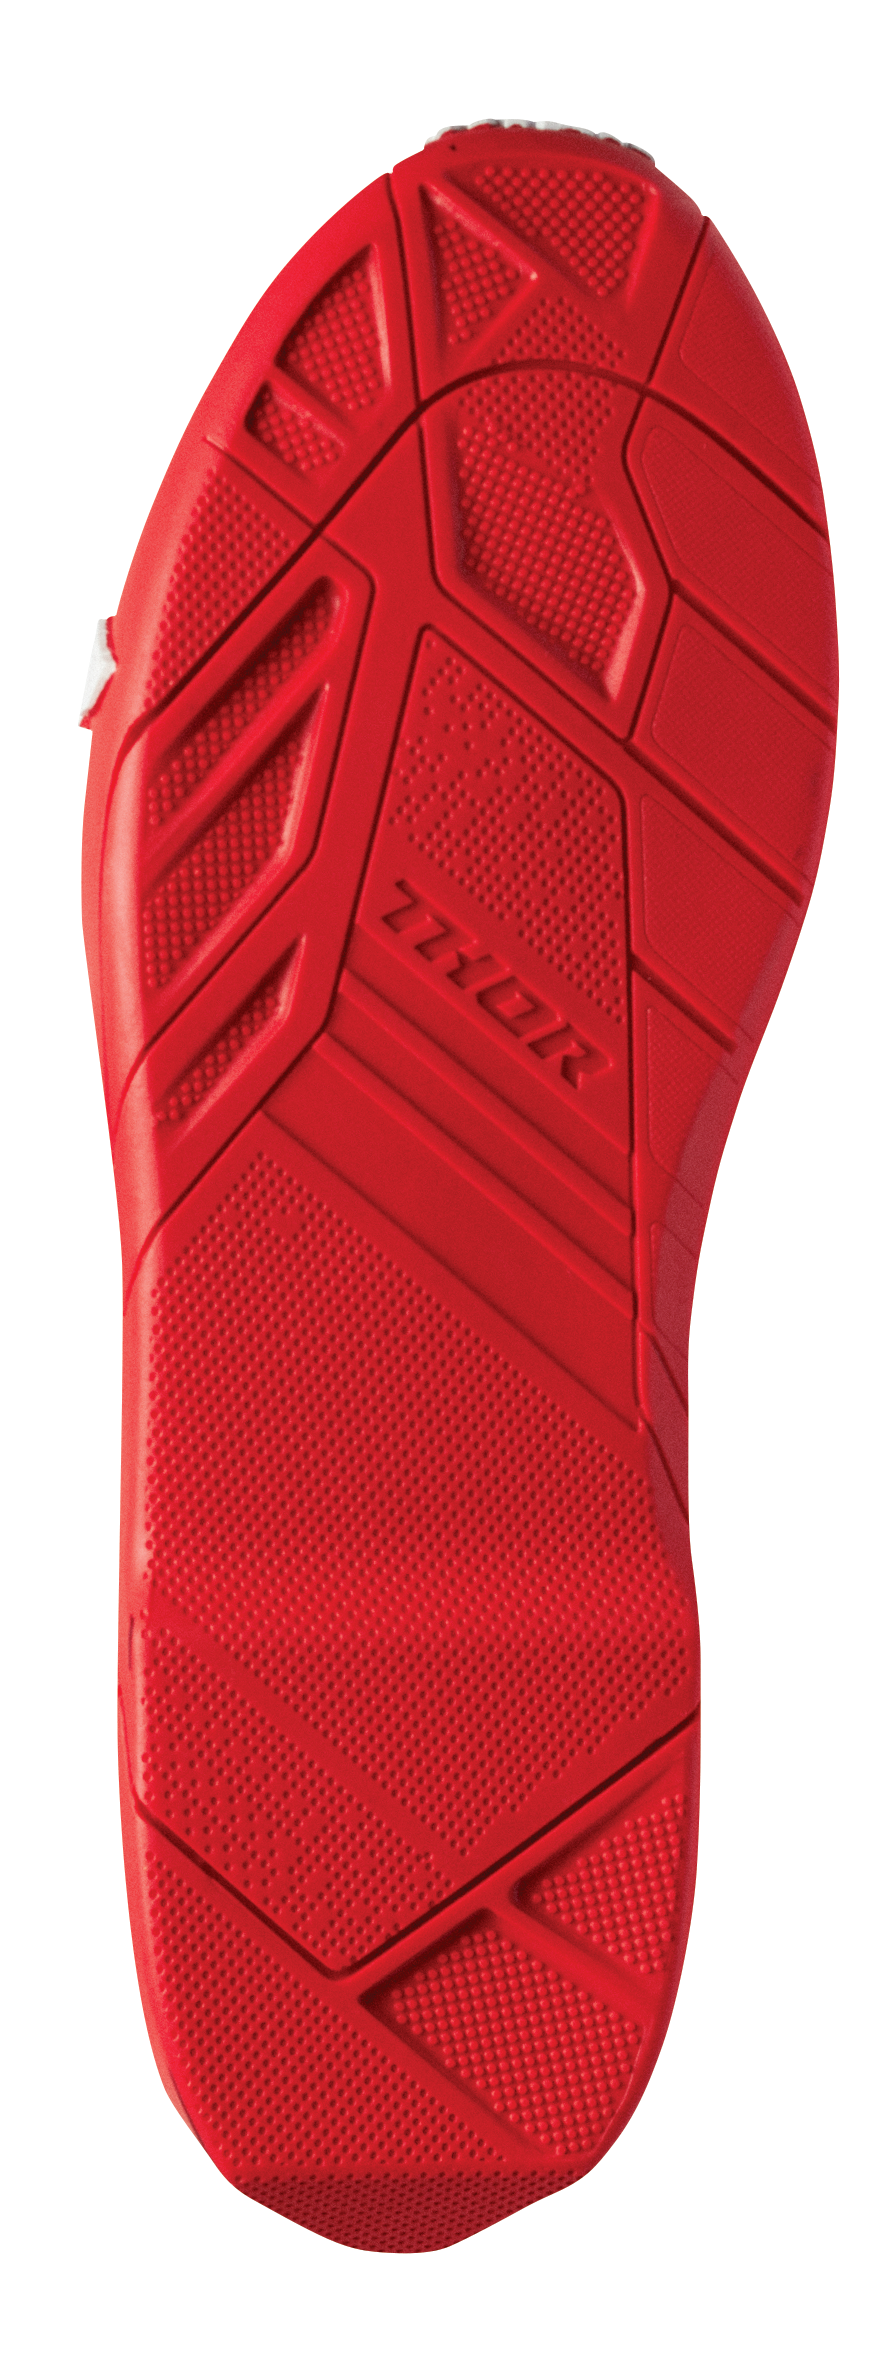 THOR Radial Boots Replacement Outsoles - Red - Size 10 3430-0999